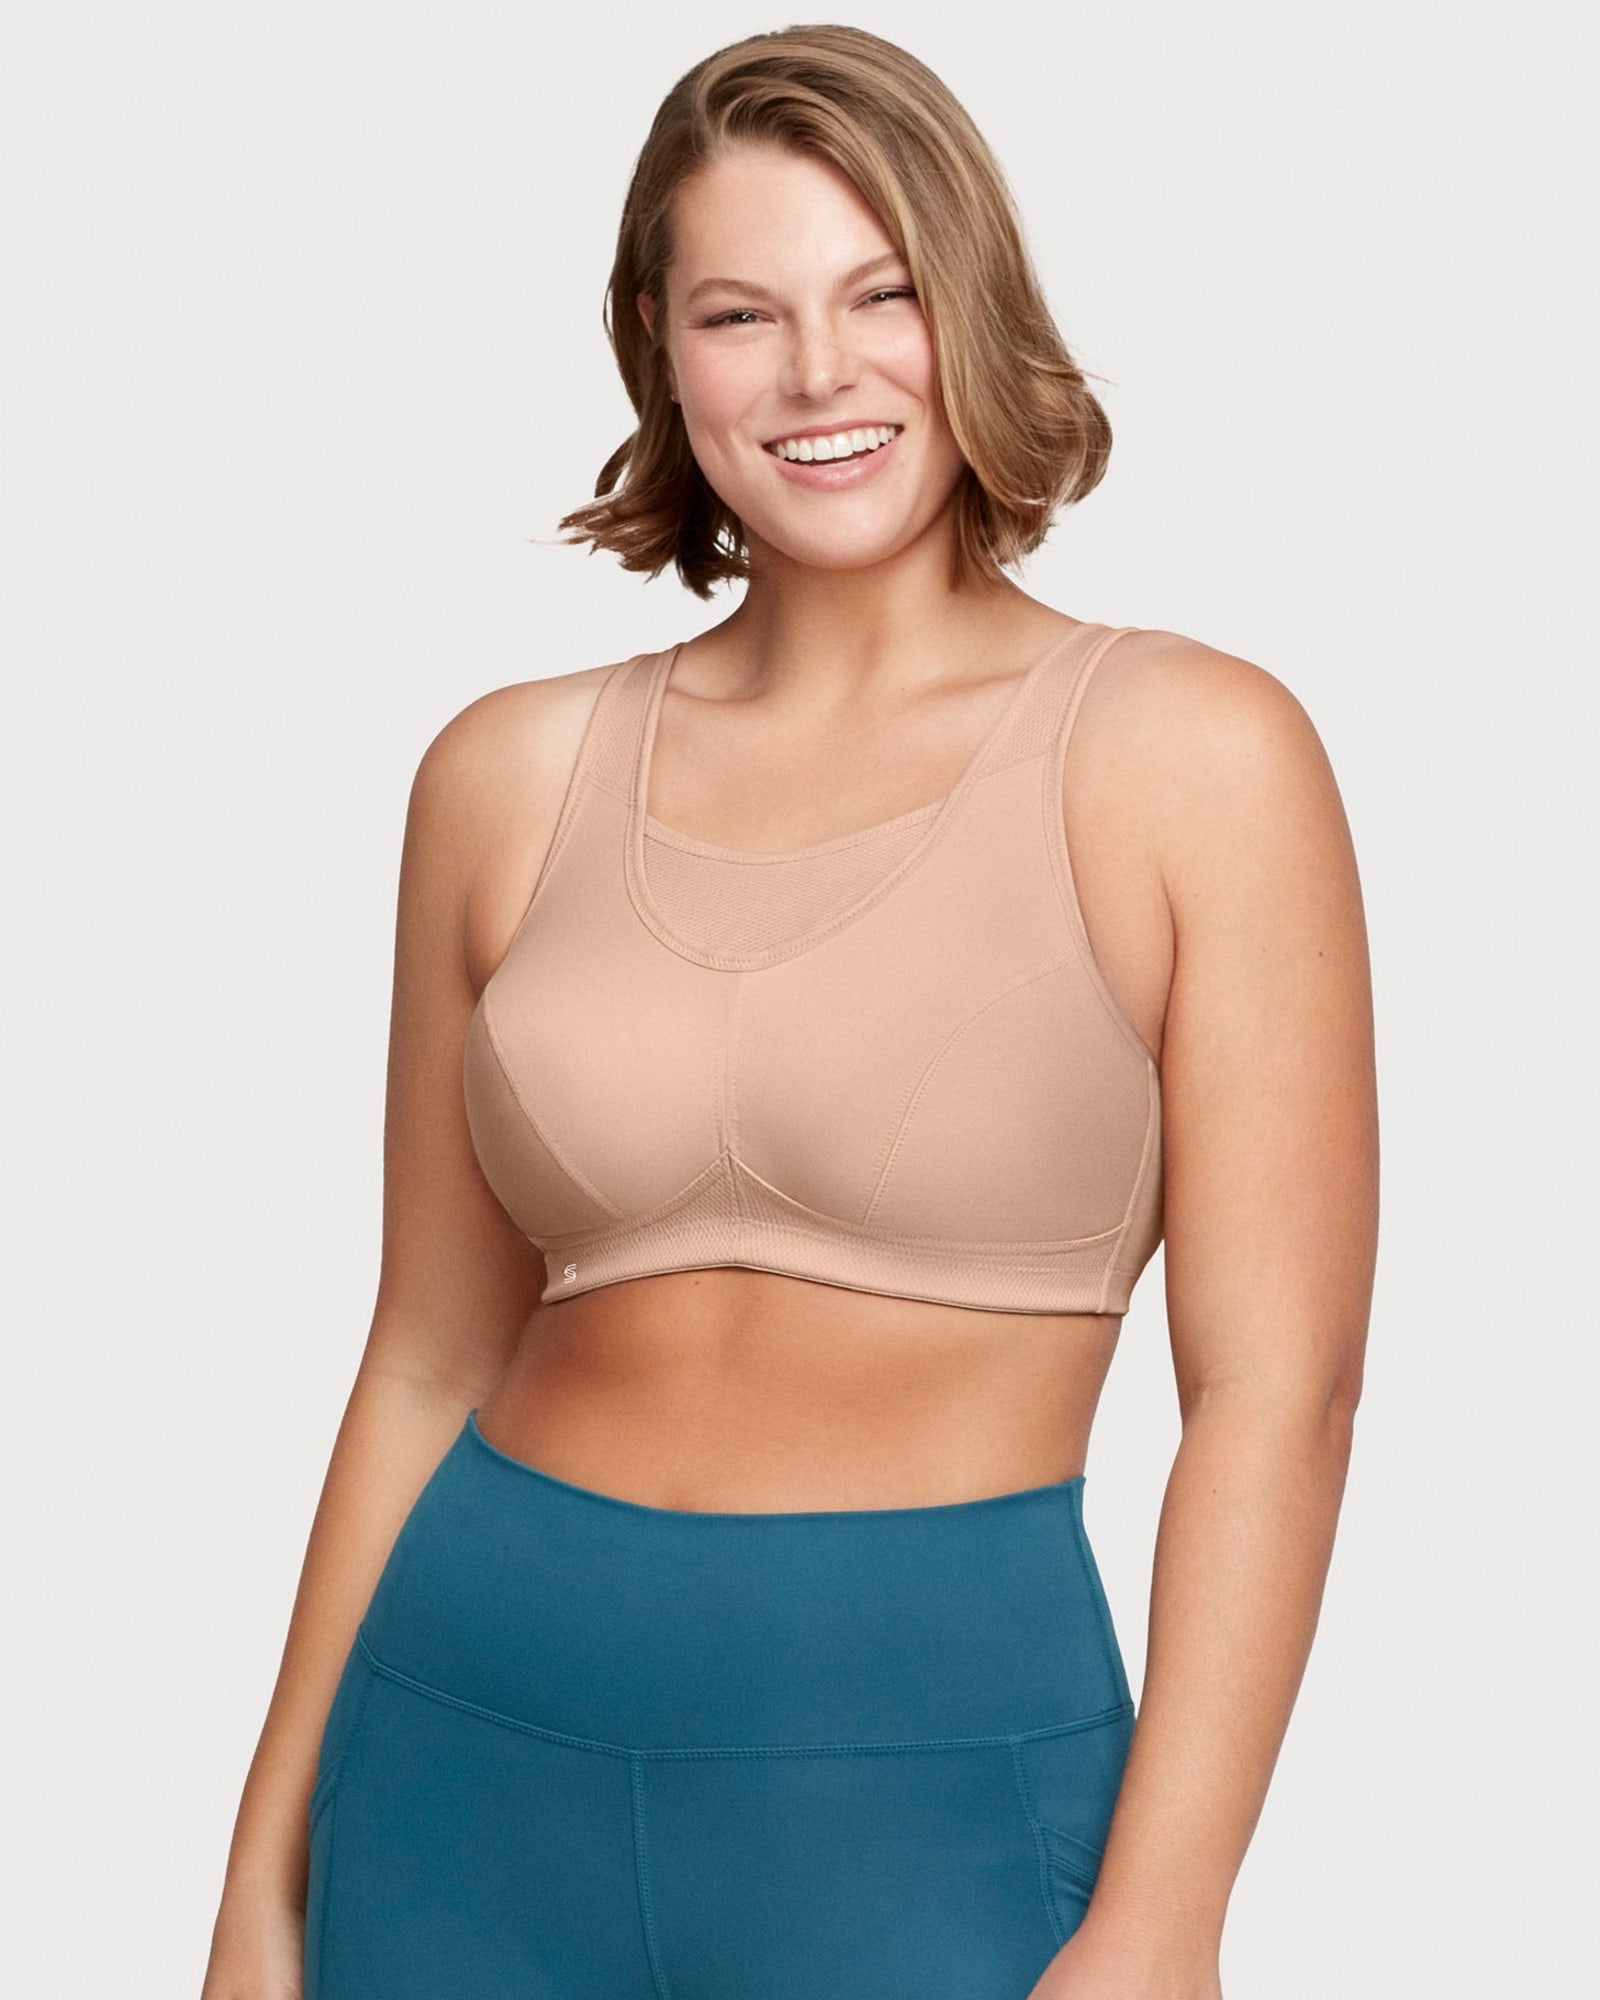 Sports Bras For Big Breasted Women!! Finally!! Ft. Dia&Co.